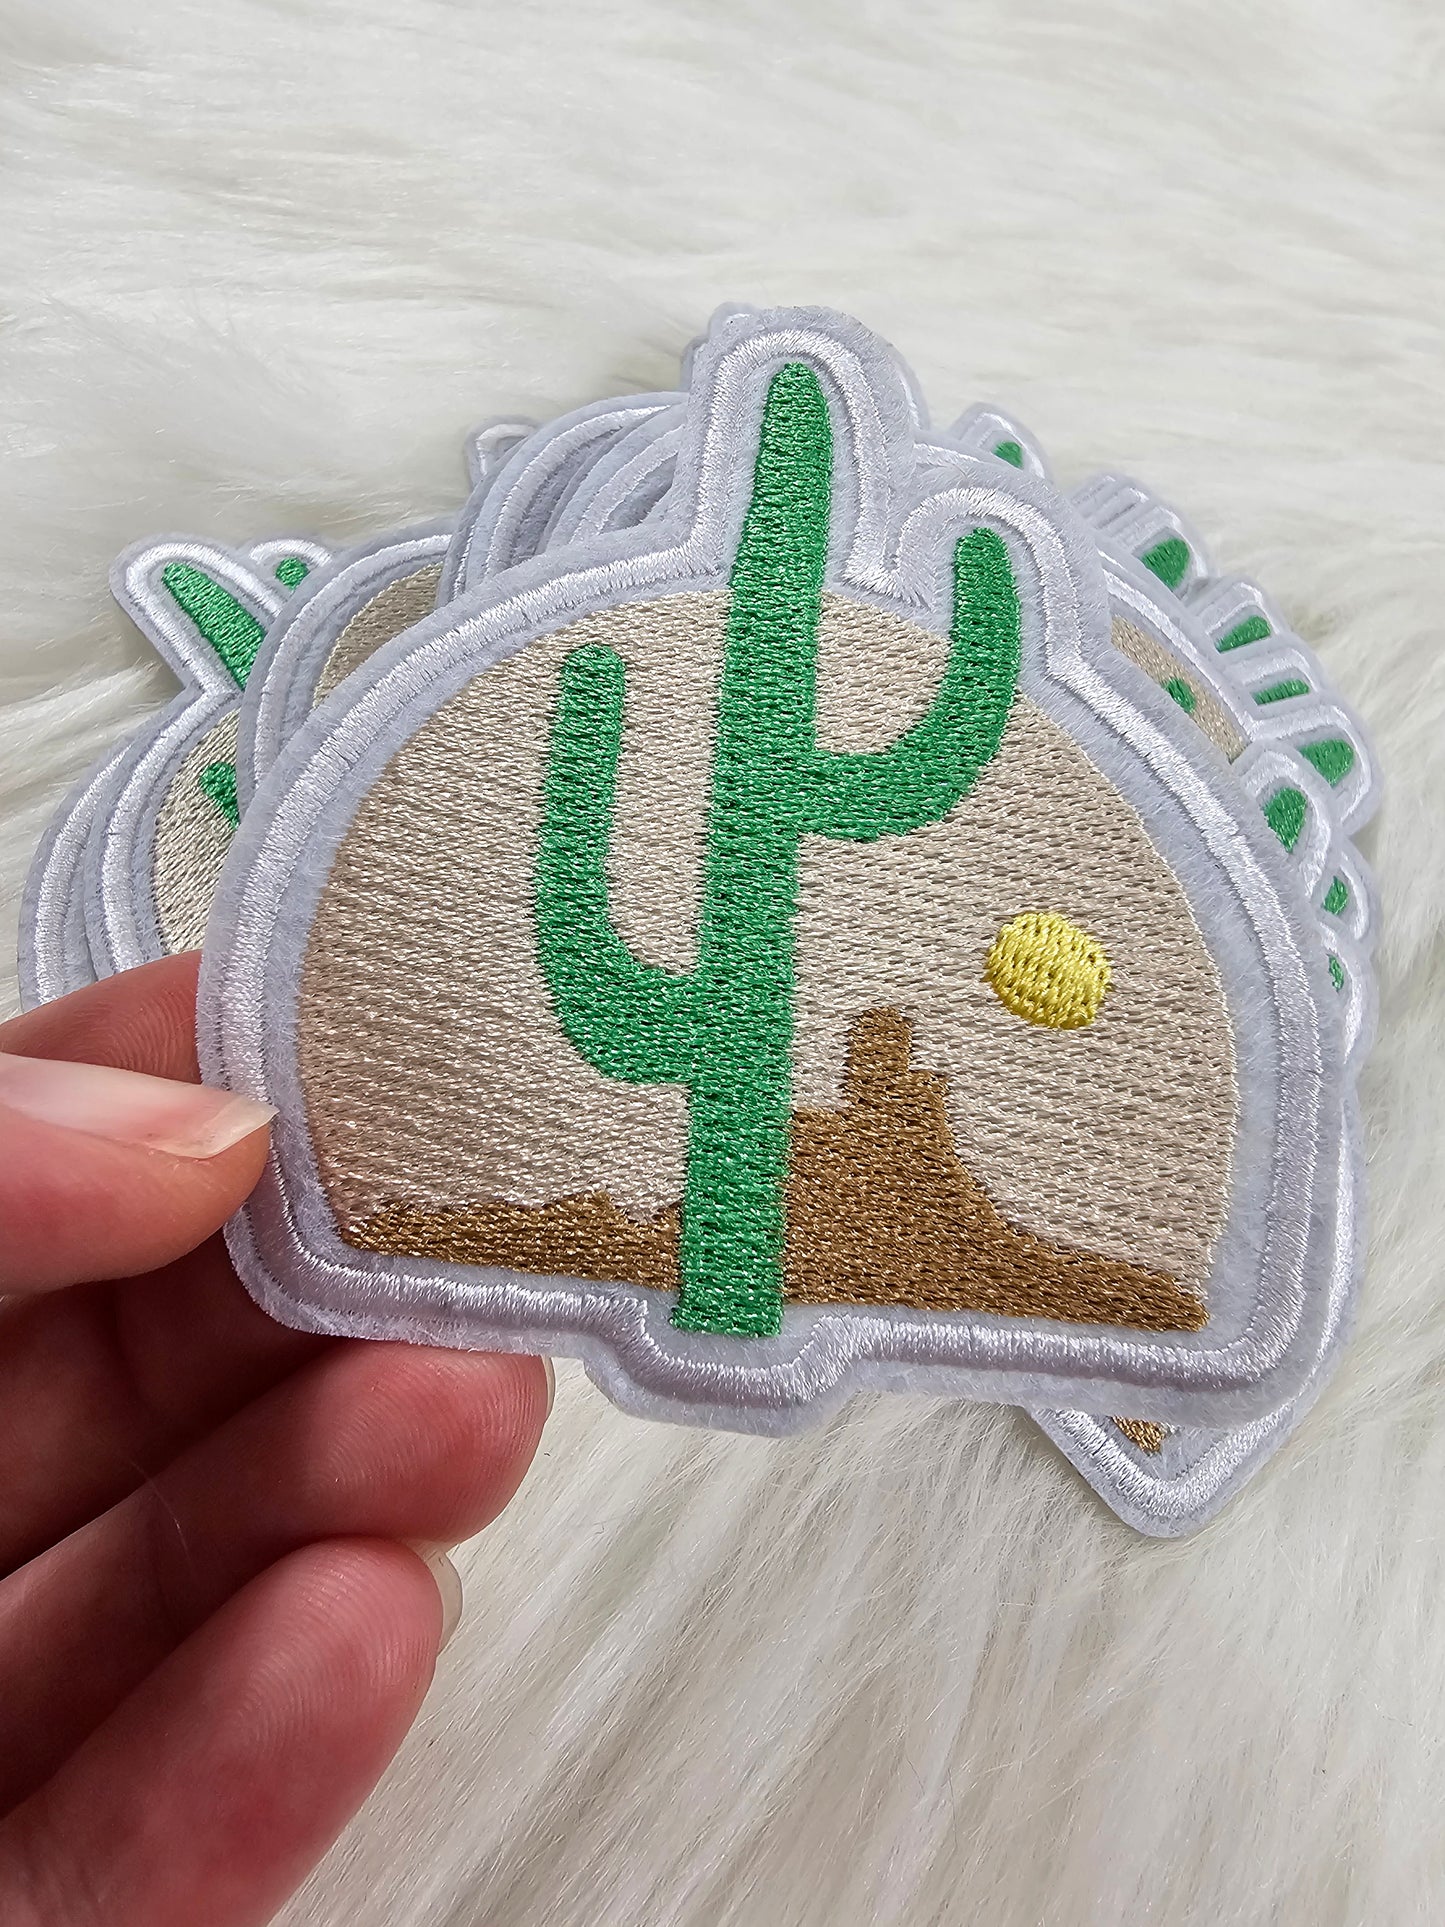 Southwestern Cactus Desert Scence Embroidery Iron On Patch